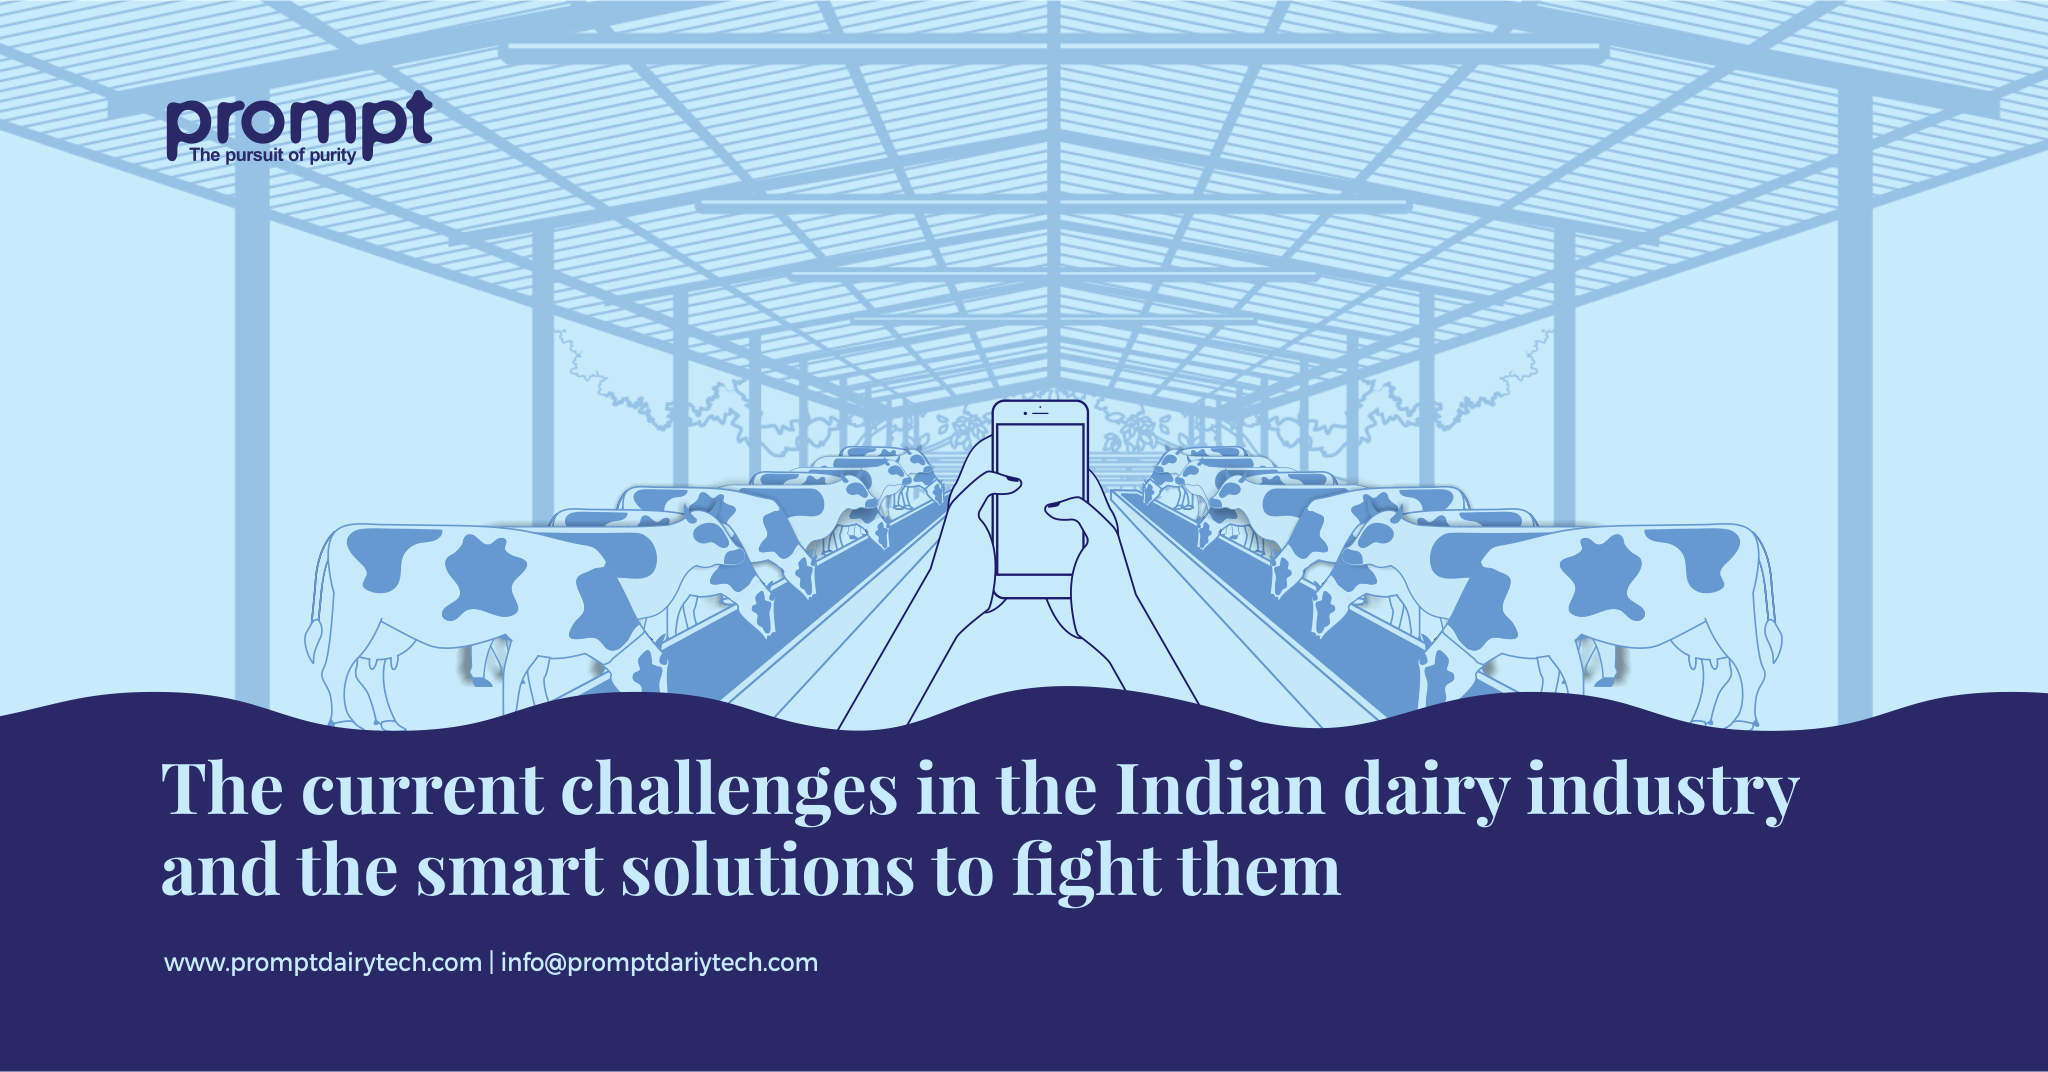 The current challenges in the Indian dairy industry and the smart solutions to fight them